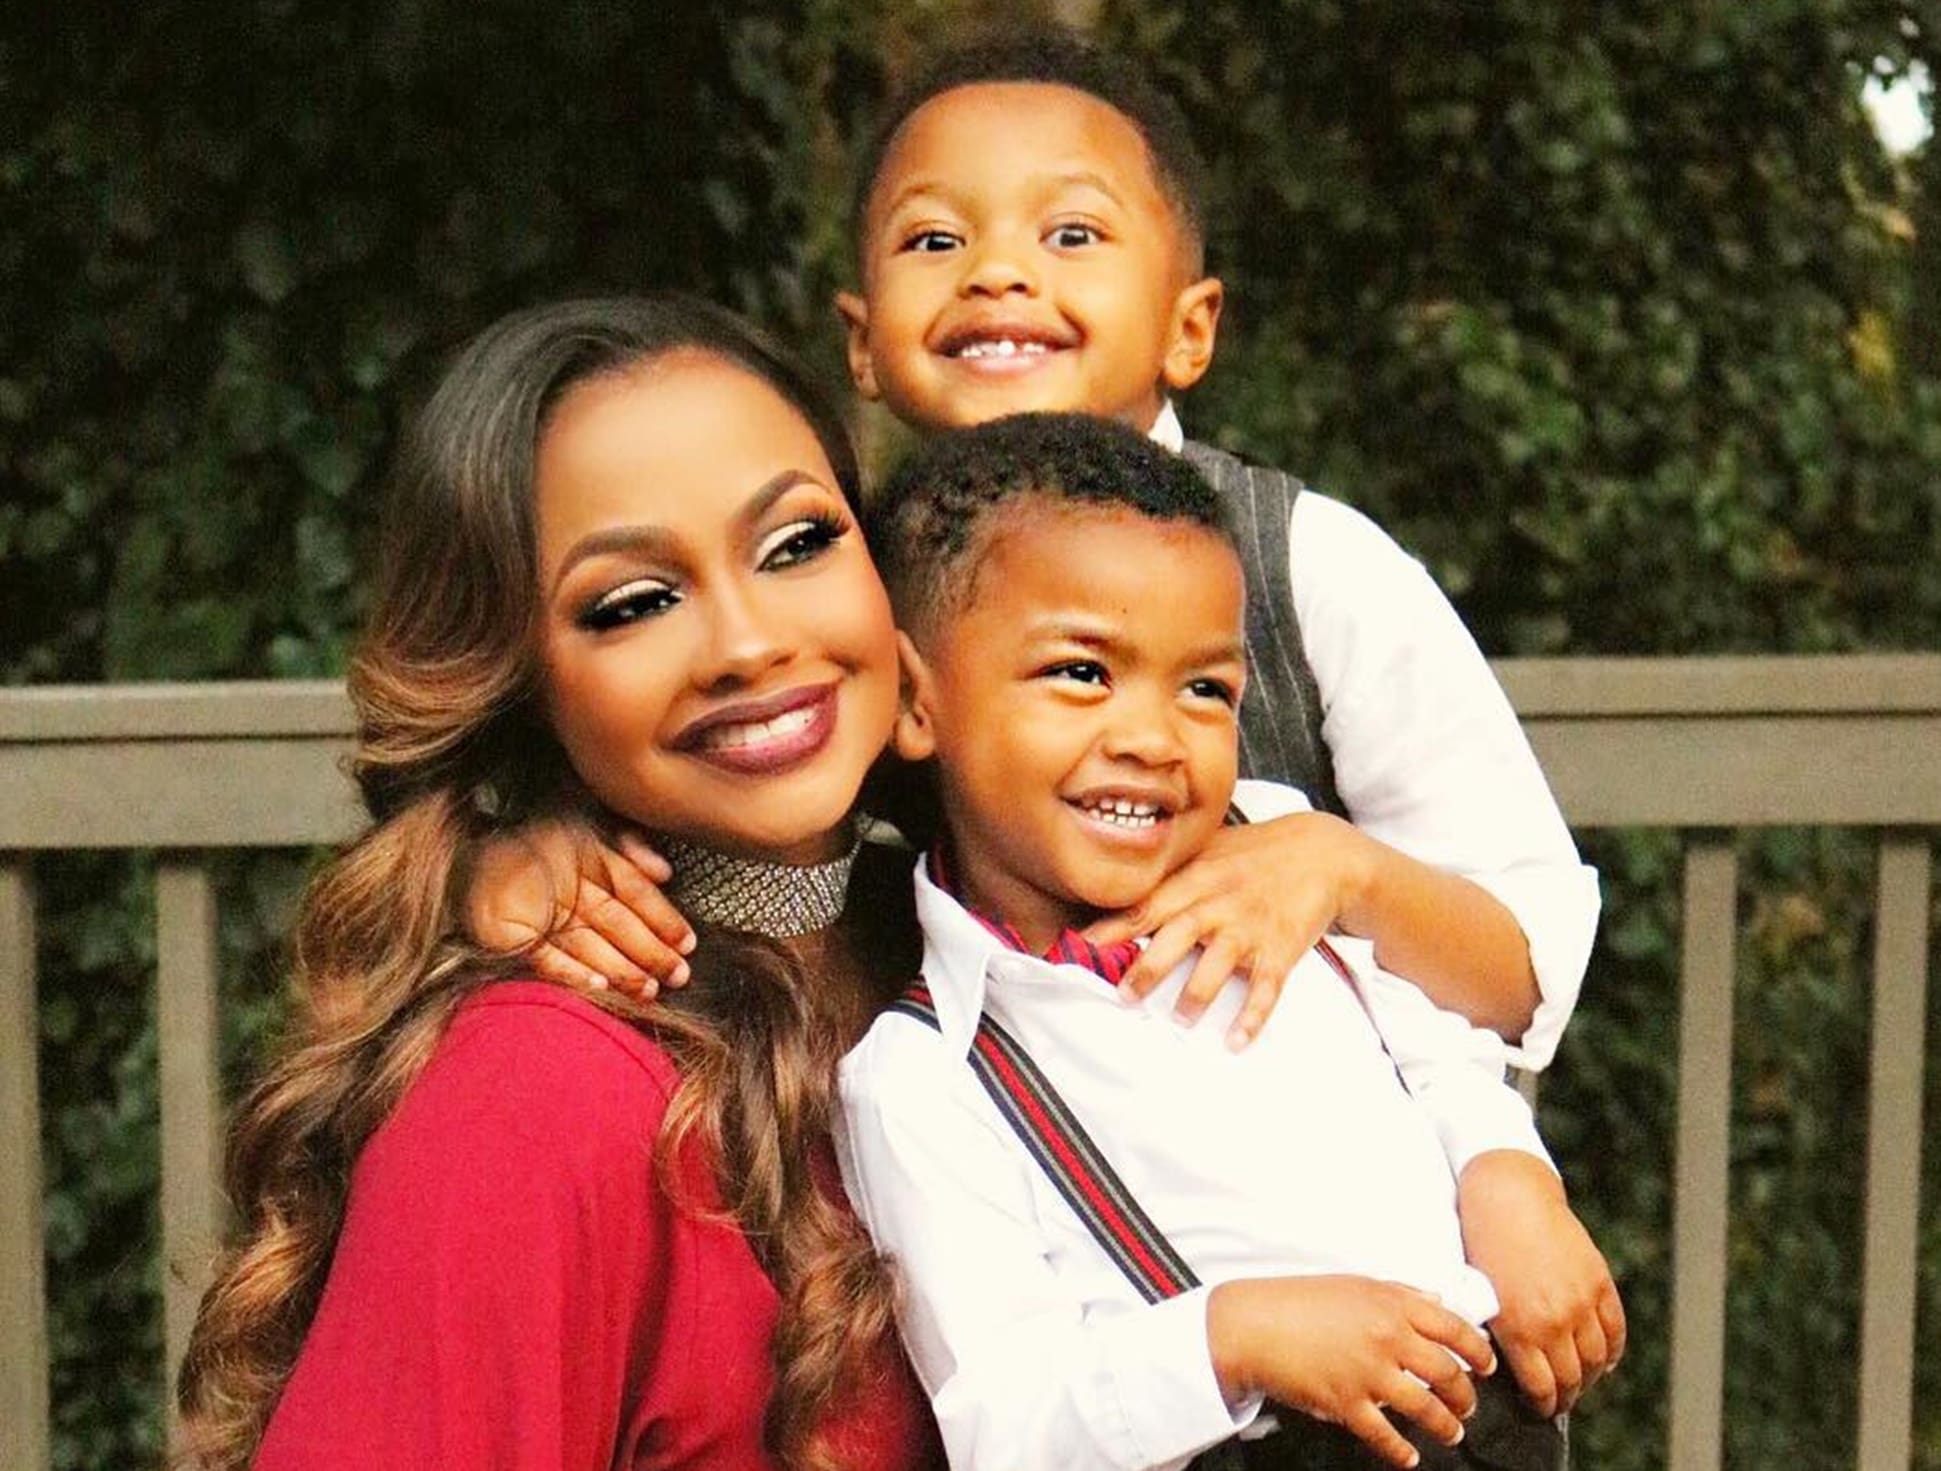 Phaedra Parks Shows Fans Some Of The Gifts Her Son, Dylan Got For His Birthday